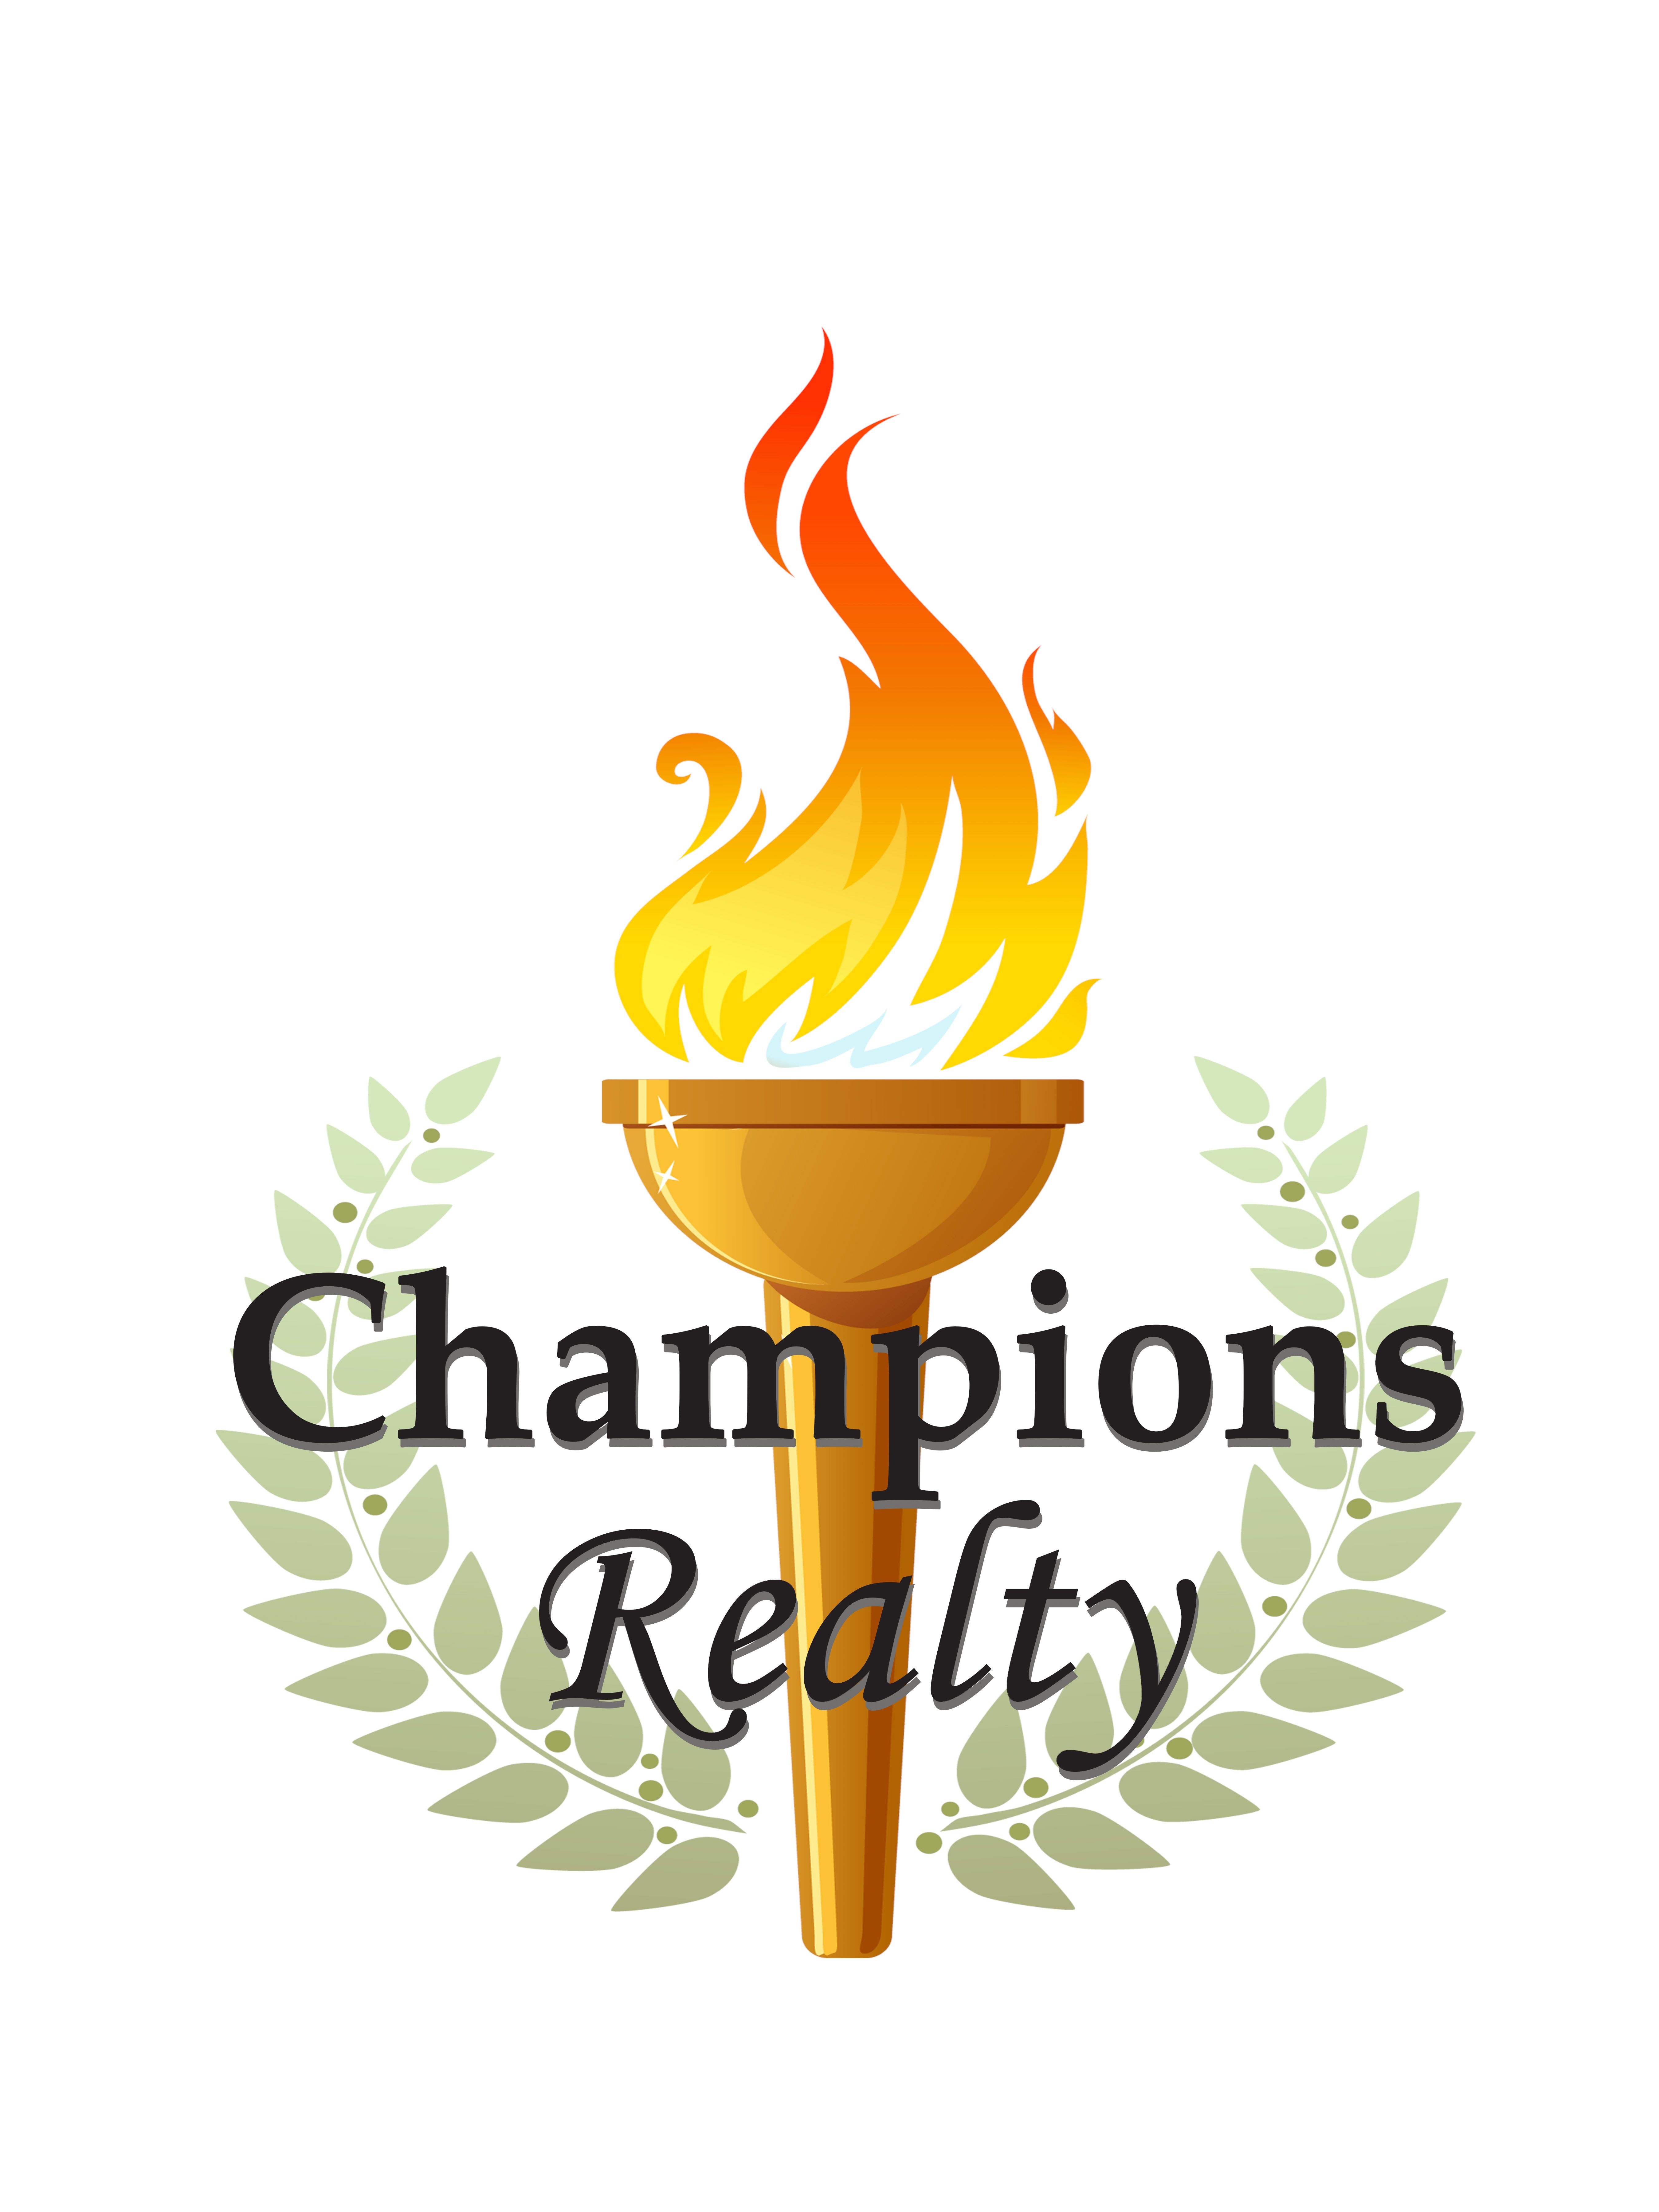 Champions Realty